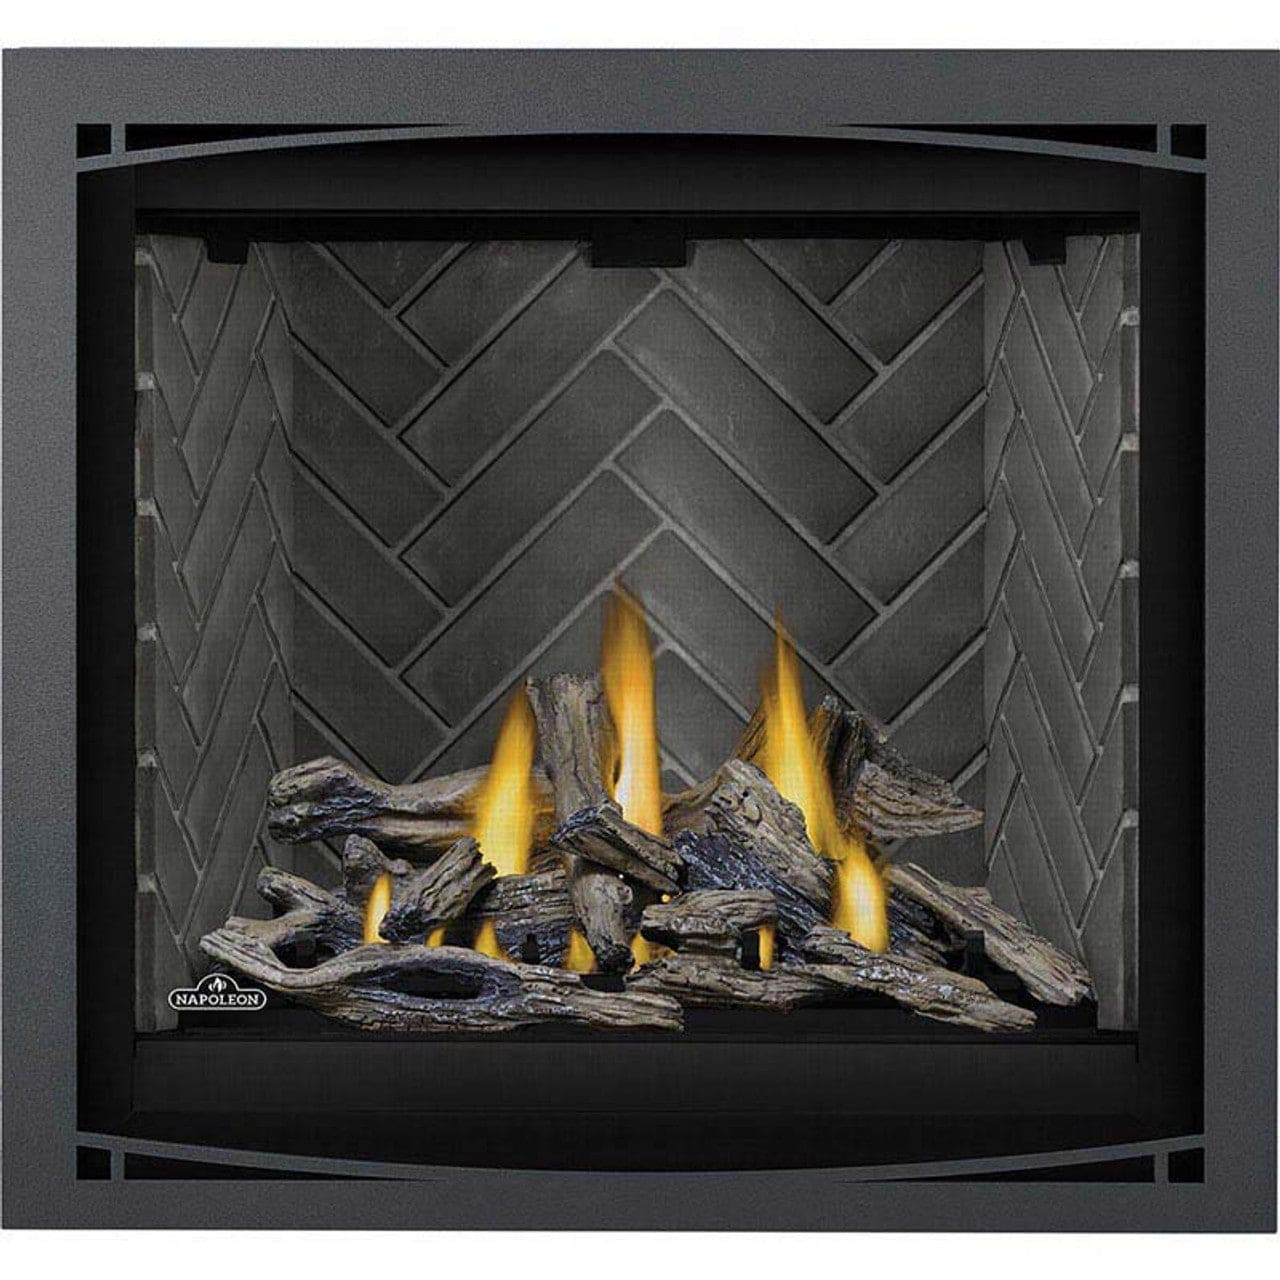 Napoleon Altitude X Direct Vent 36" Natural Gas Fireplace - AX36NTE-1 - Chimney Cricket